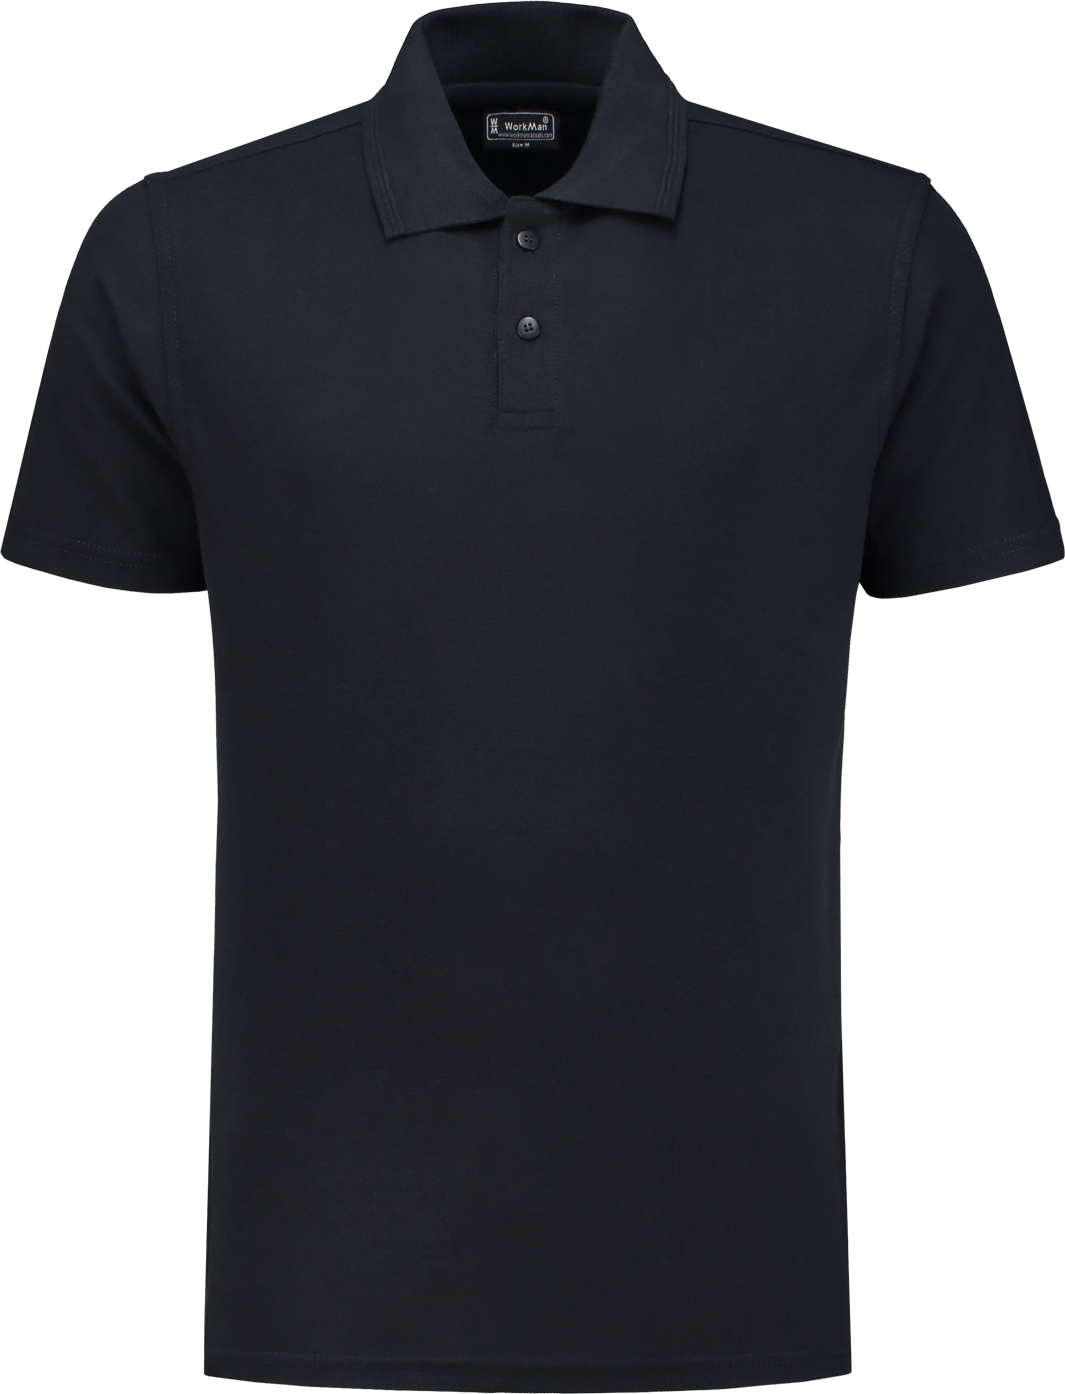 10.6.8102.08 8102 Poloshirt Outfitters Navy 5XL